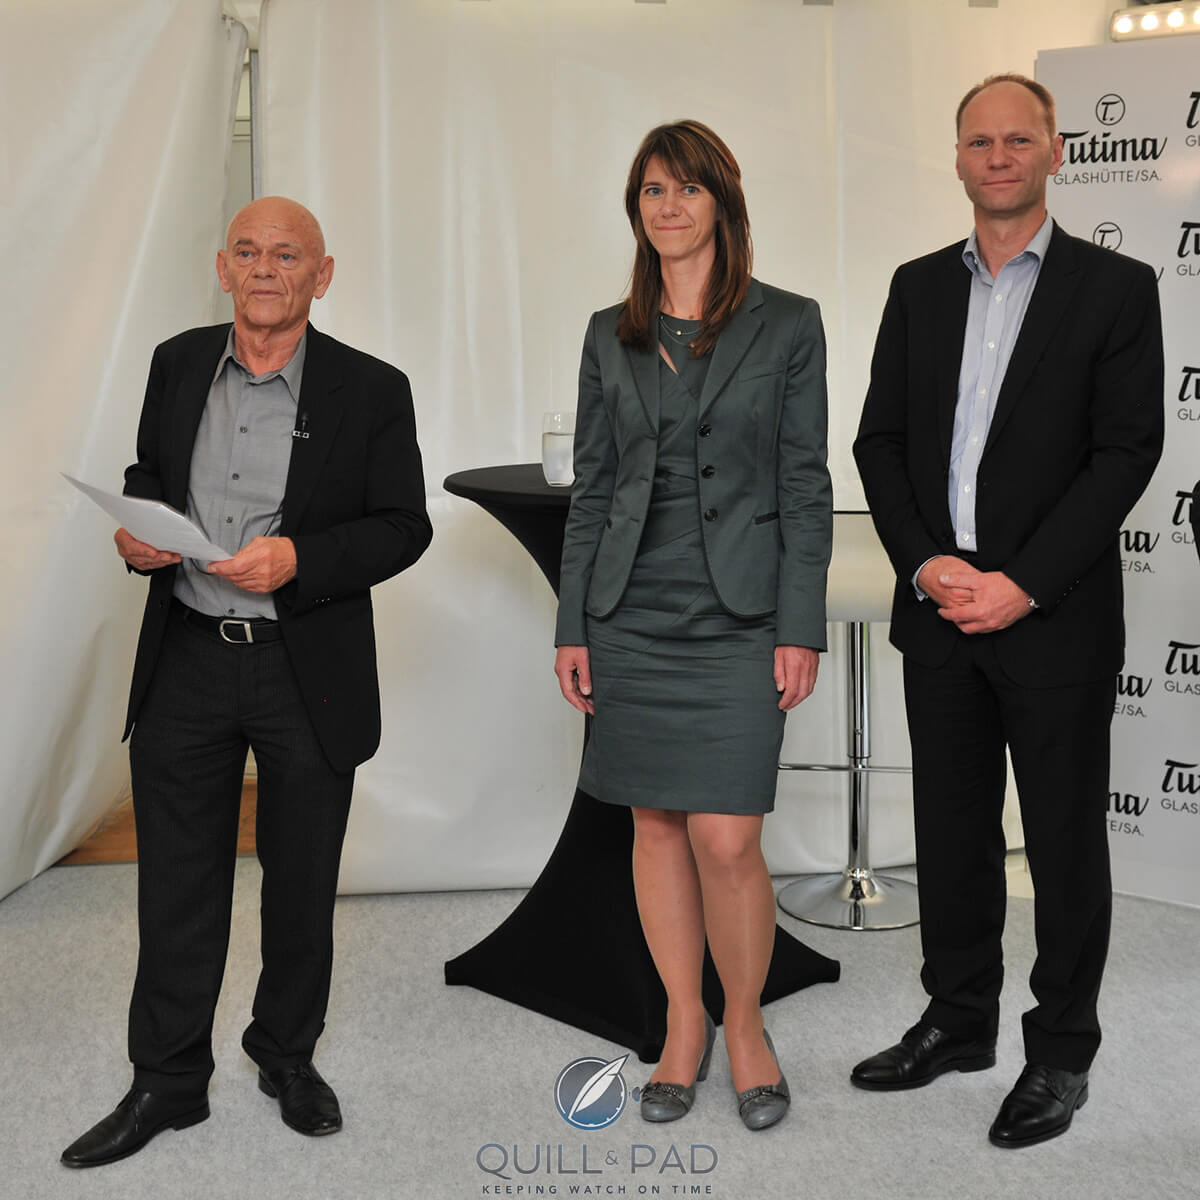 Delecate family left to right: Dieter Delecate, Ute Delecate, and Jörg Delecate at the Glashütte factory opening in 2011